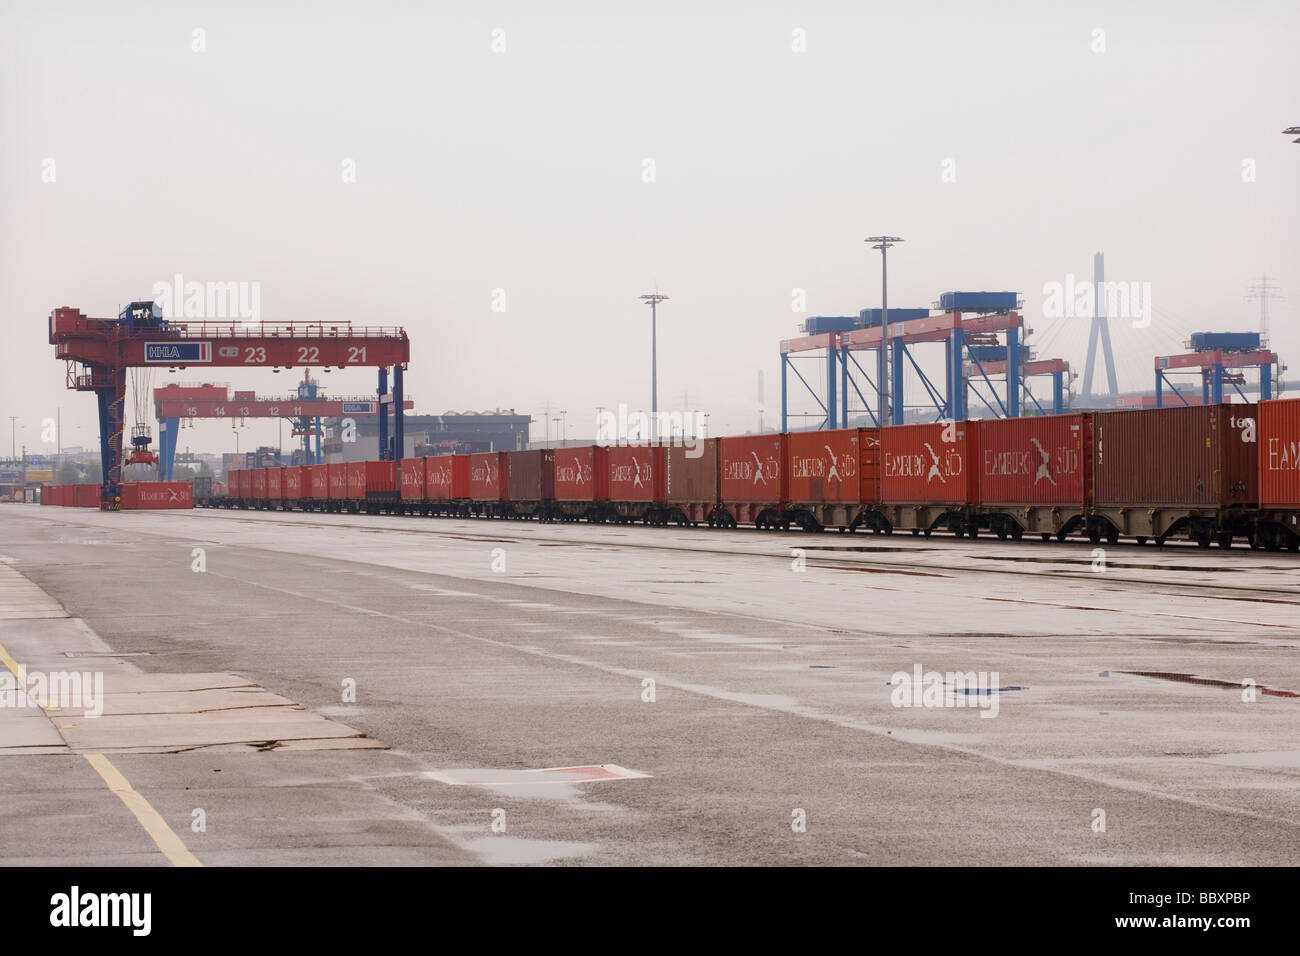 Intermodal ship-to-rail container freight on a port railway network waiting for transit. Stock Photo